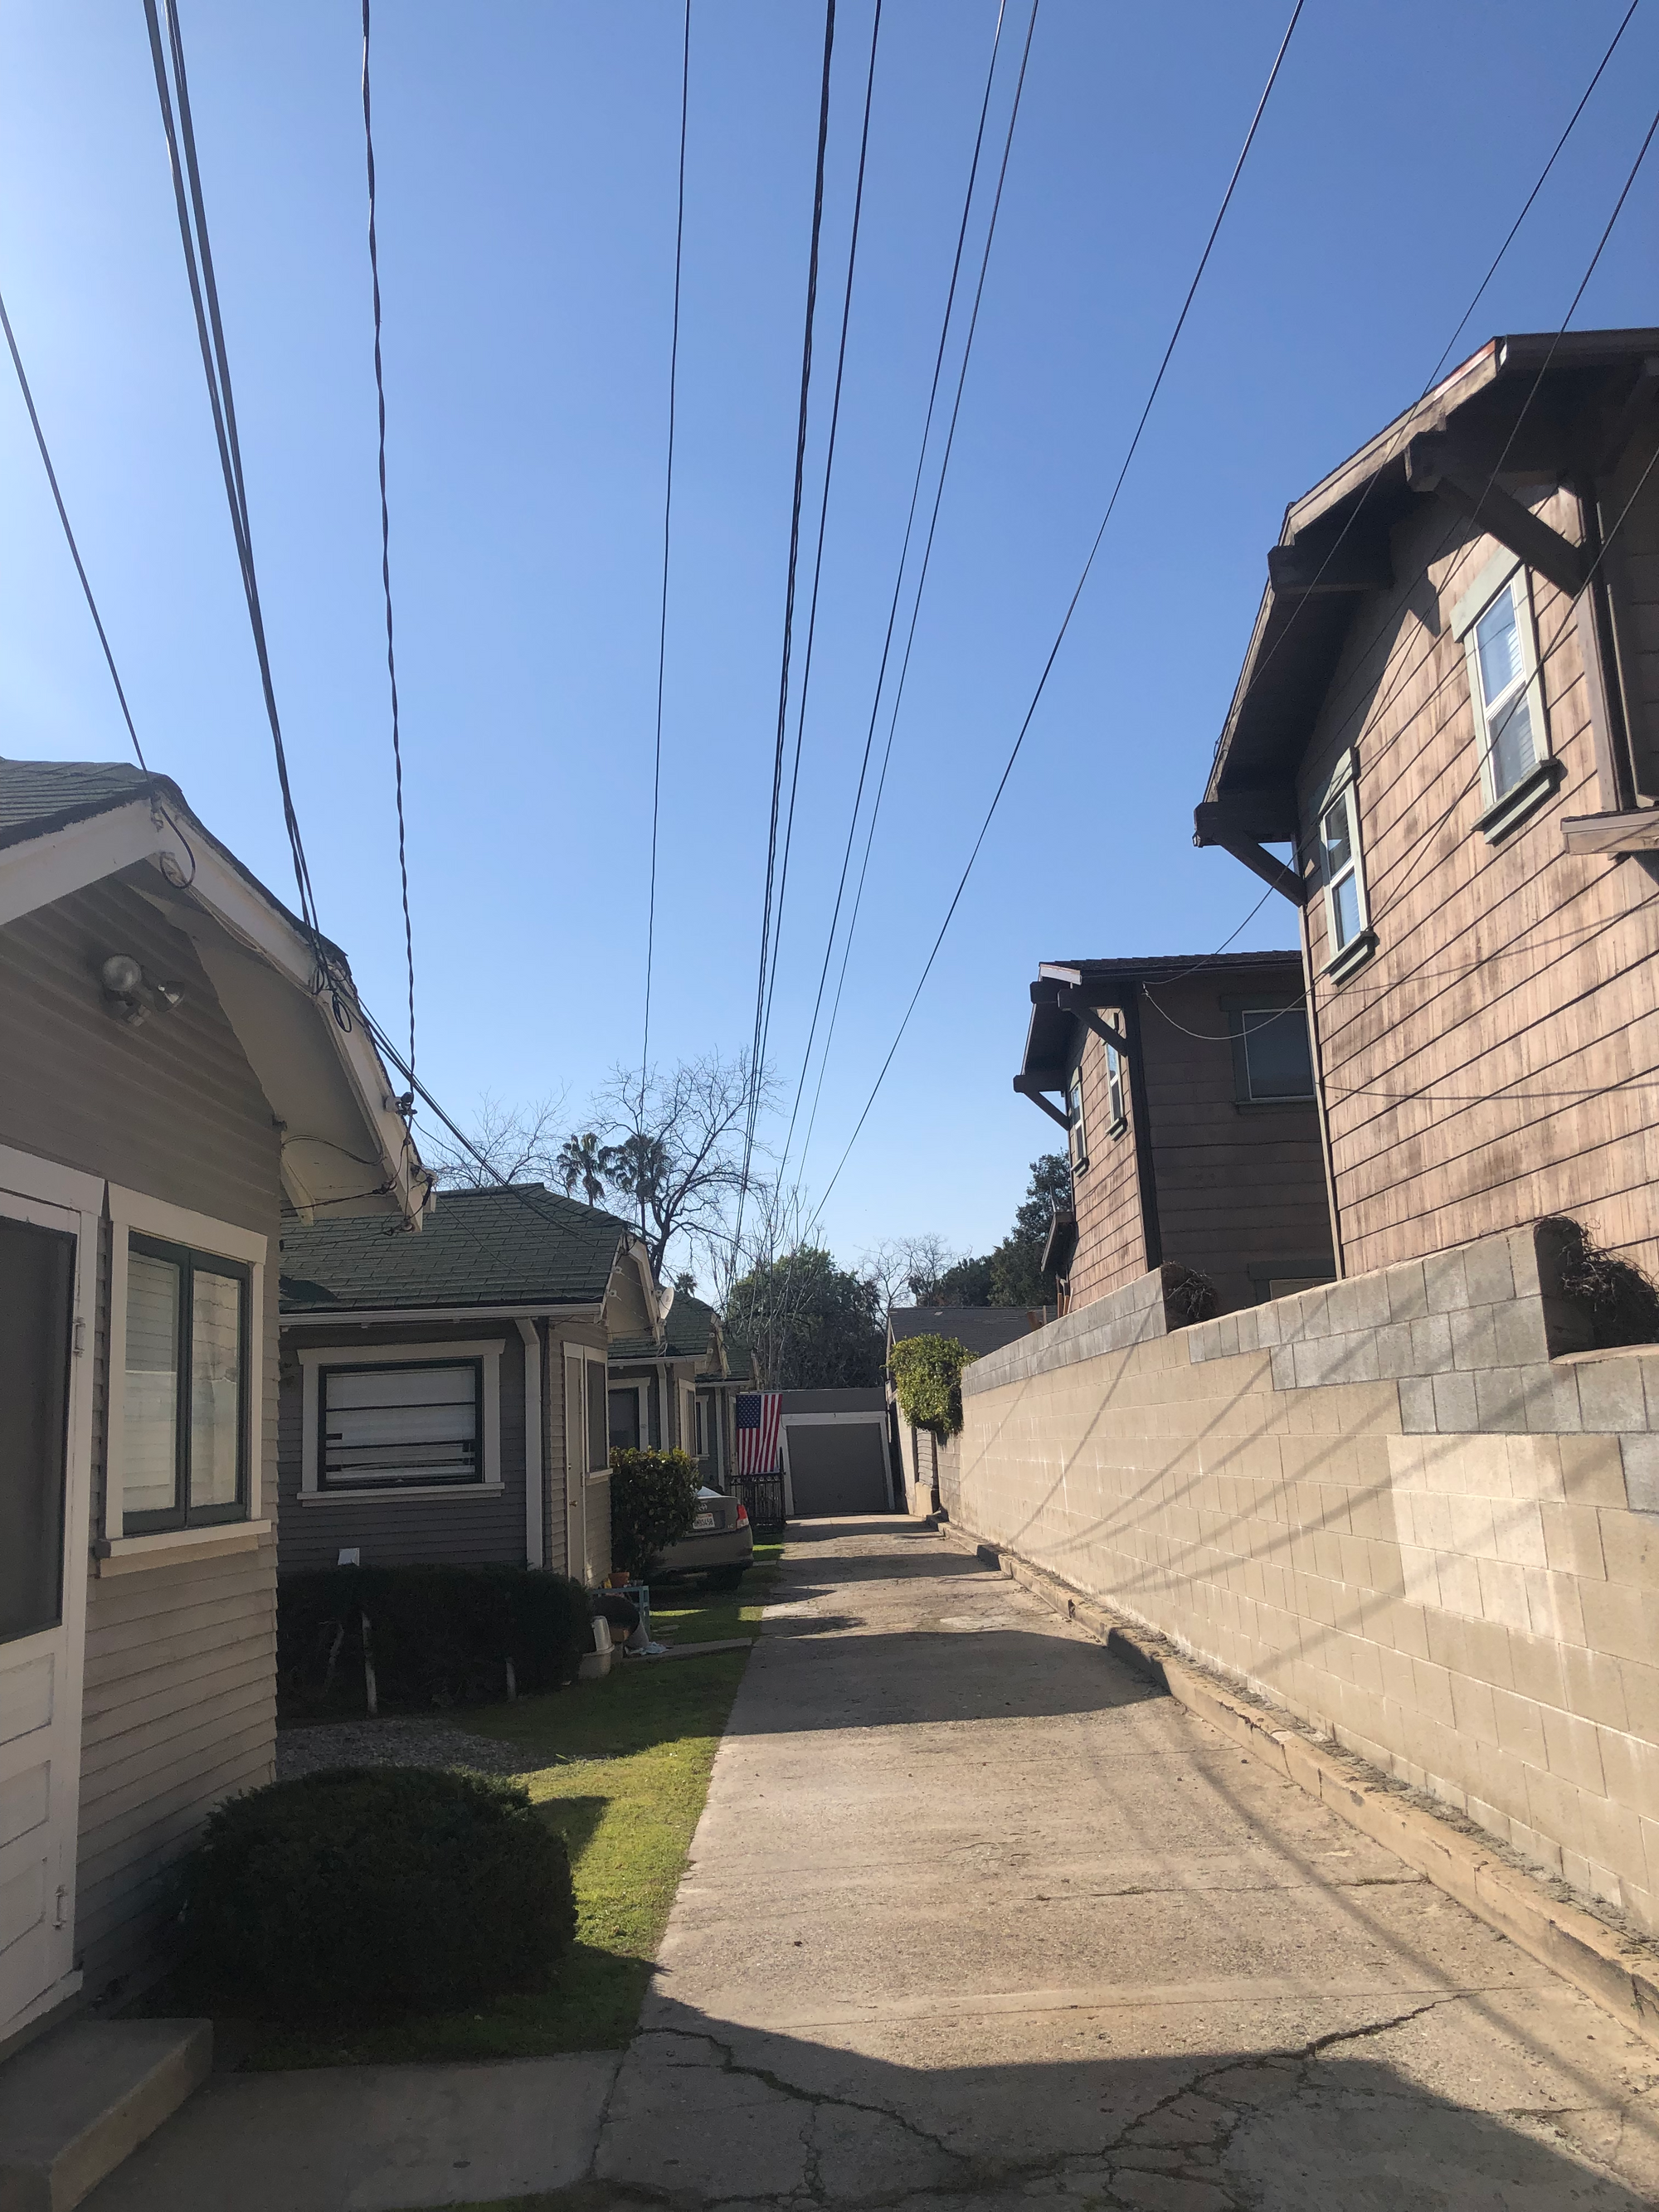 photo of a long paved car-sized path for a row of modest gray houses with dark green roofs, a usa flag hanging at the far house, its garage marking the end of the path. path cracked in the foreground. above stream power lines, casting stark shadows across a worn brick wall separating the homes from two larger light brown houses. taken near the robledo art, strike! headquarters, february 2023.